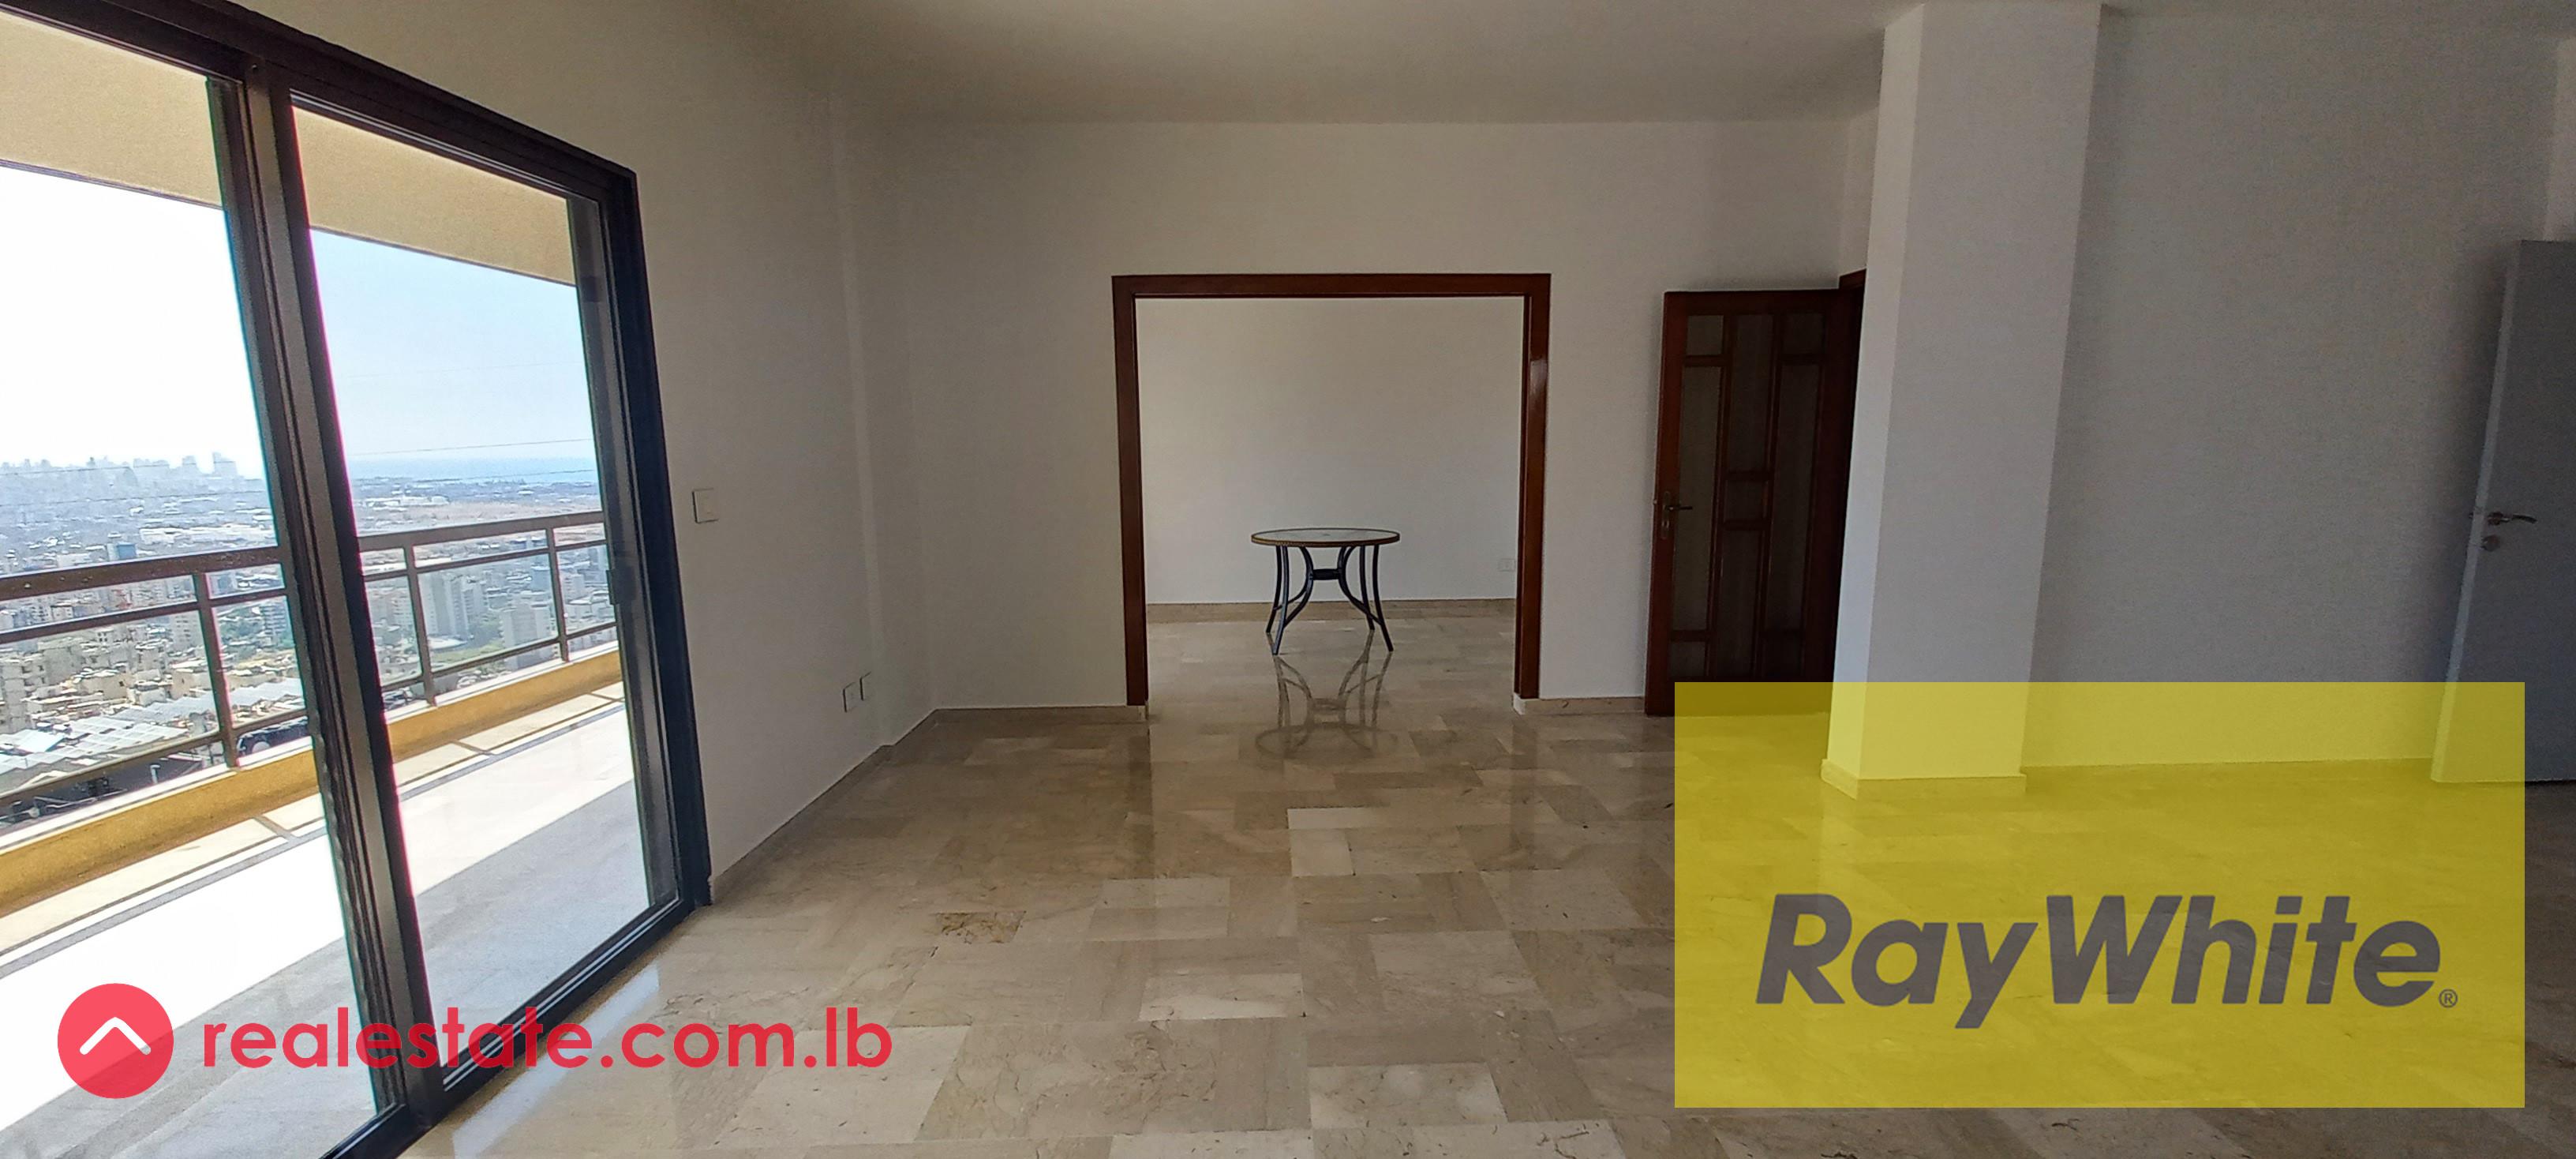 Panoramic view / Apartment In Biaqout for Sale